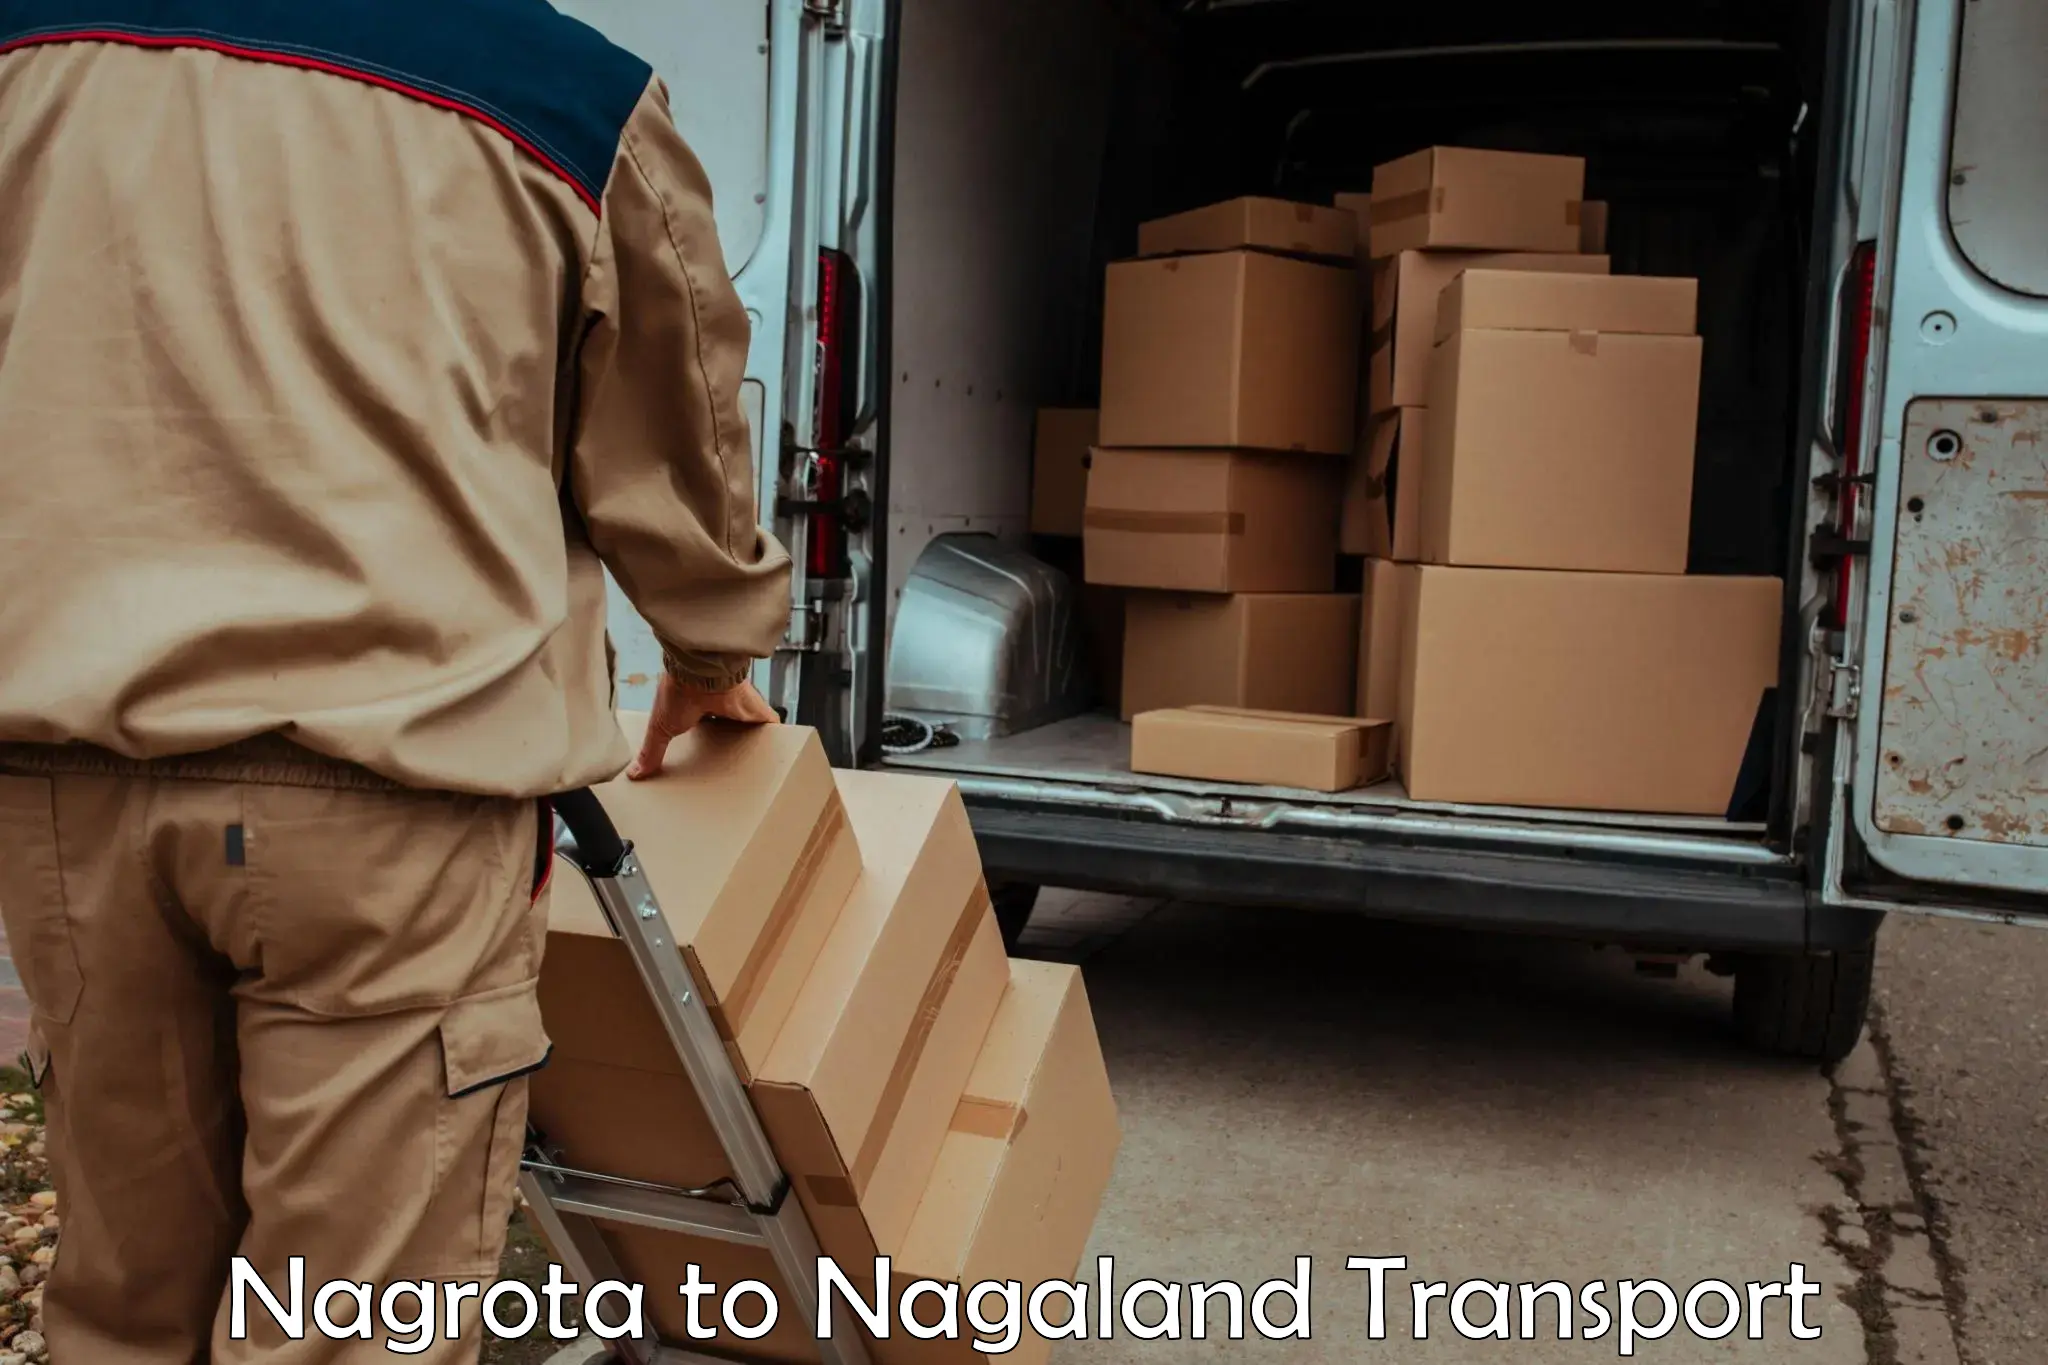 Container transport service Nagrota to NIT Nagaland